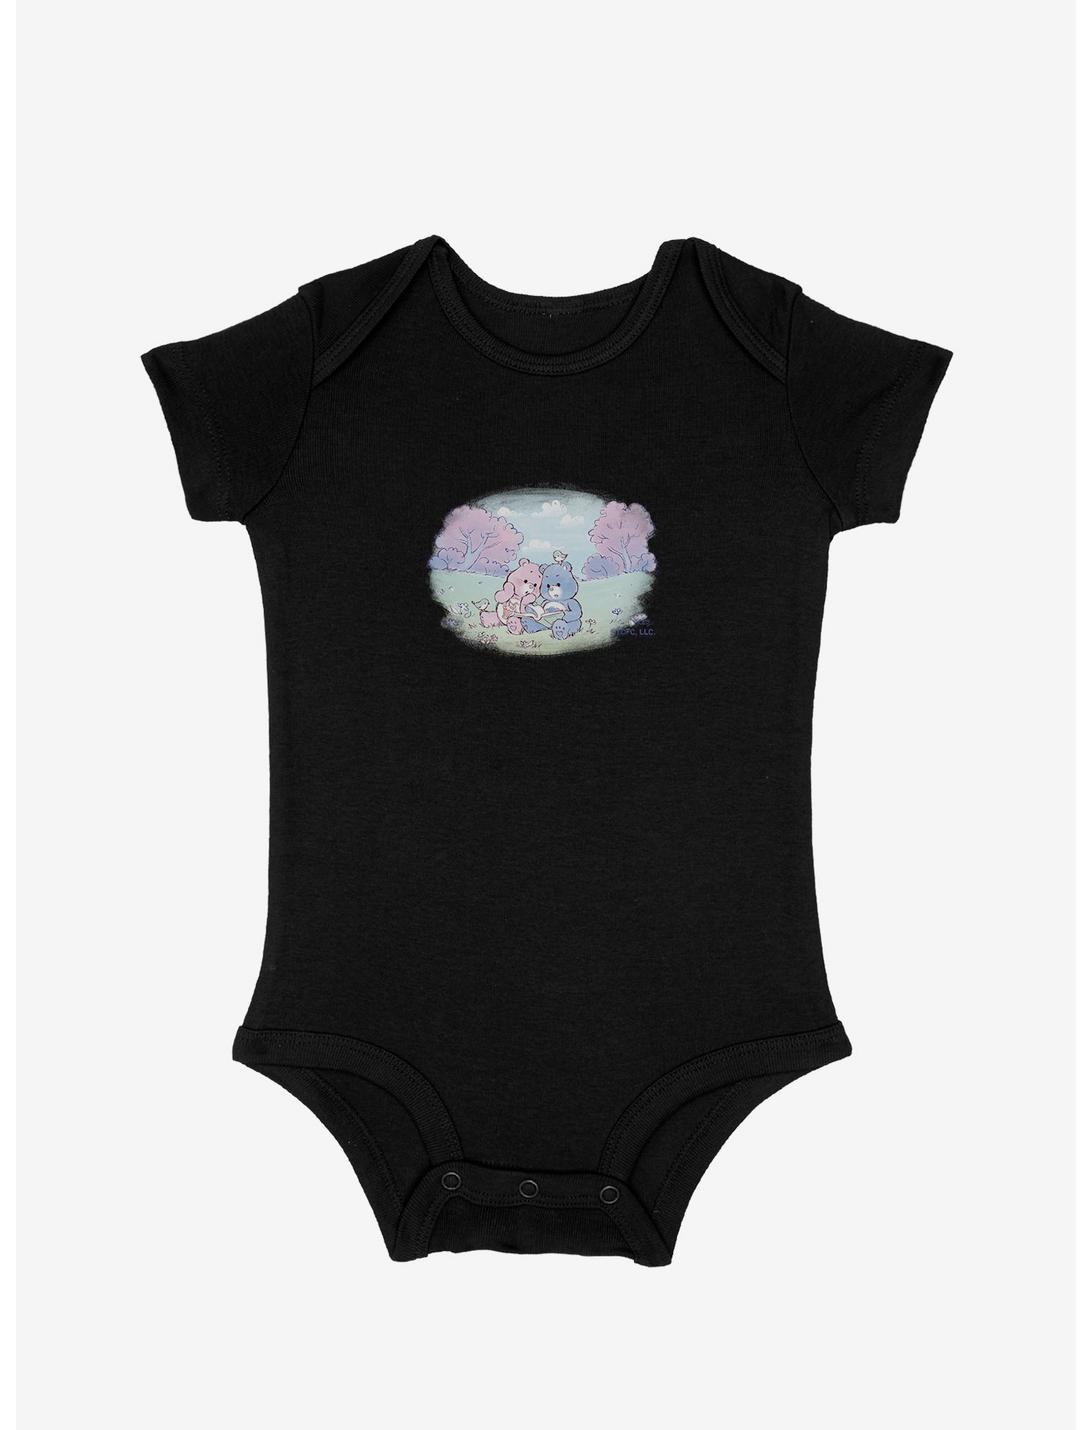 Care Bears Share And Grumpy Bear Story Time Infant Bodysuit, , hi-res